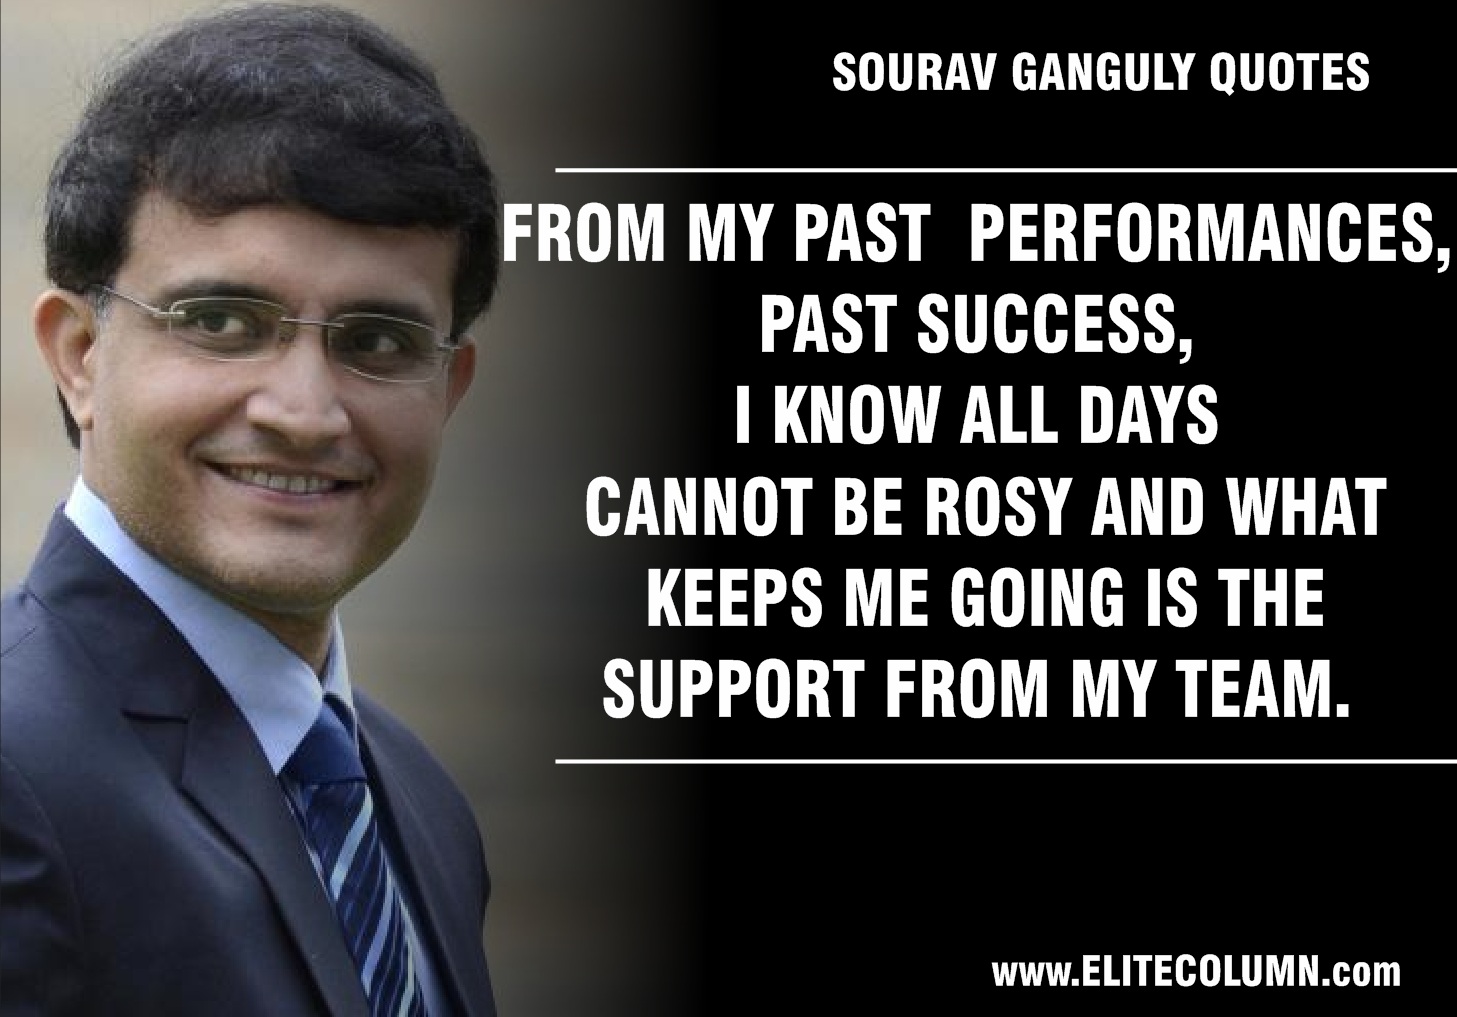 Sourav Ganguly Quotes (1)